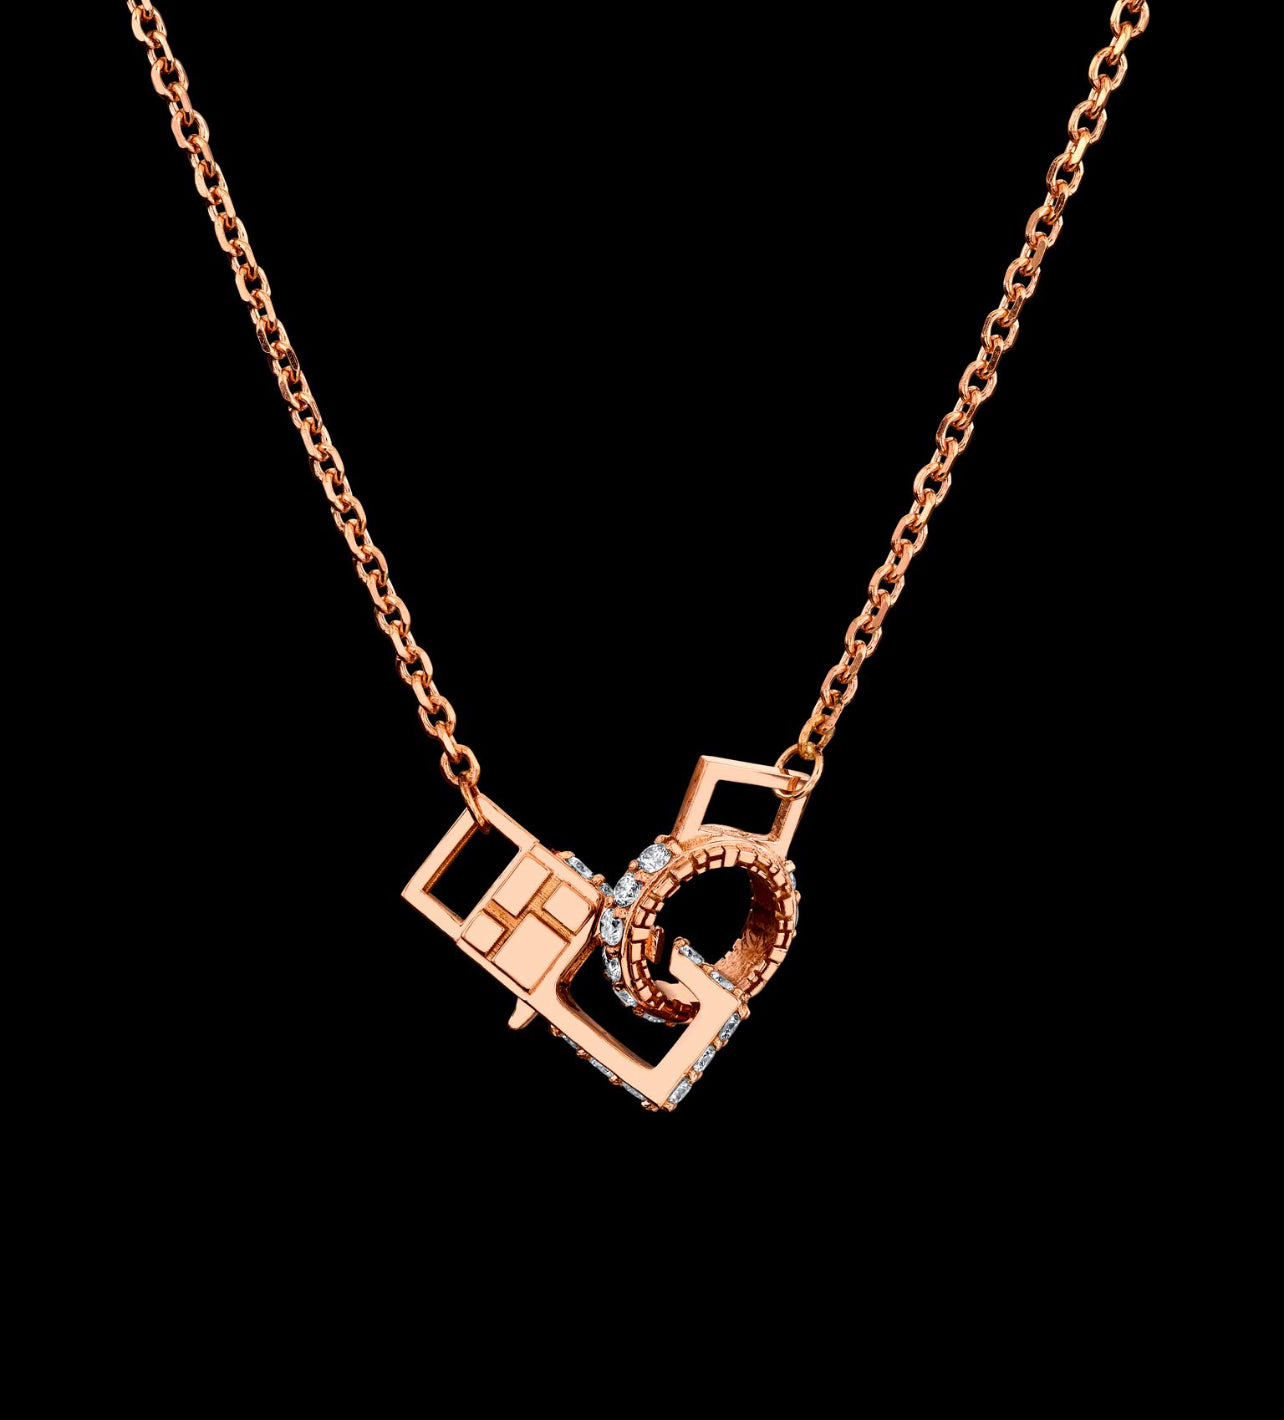 Signature Collection XL ‘INTERLOCKED’ Necklace with diamonds